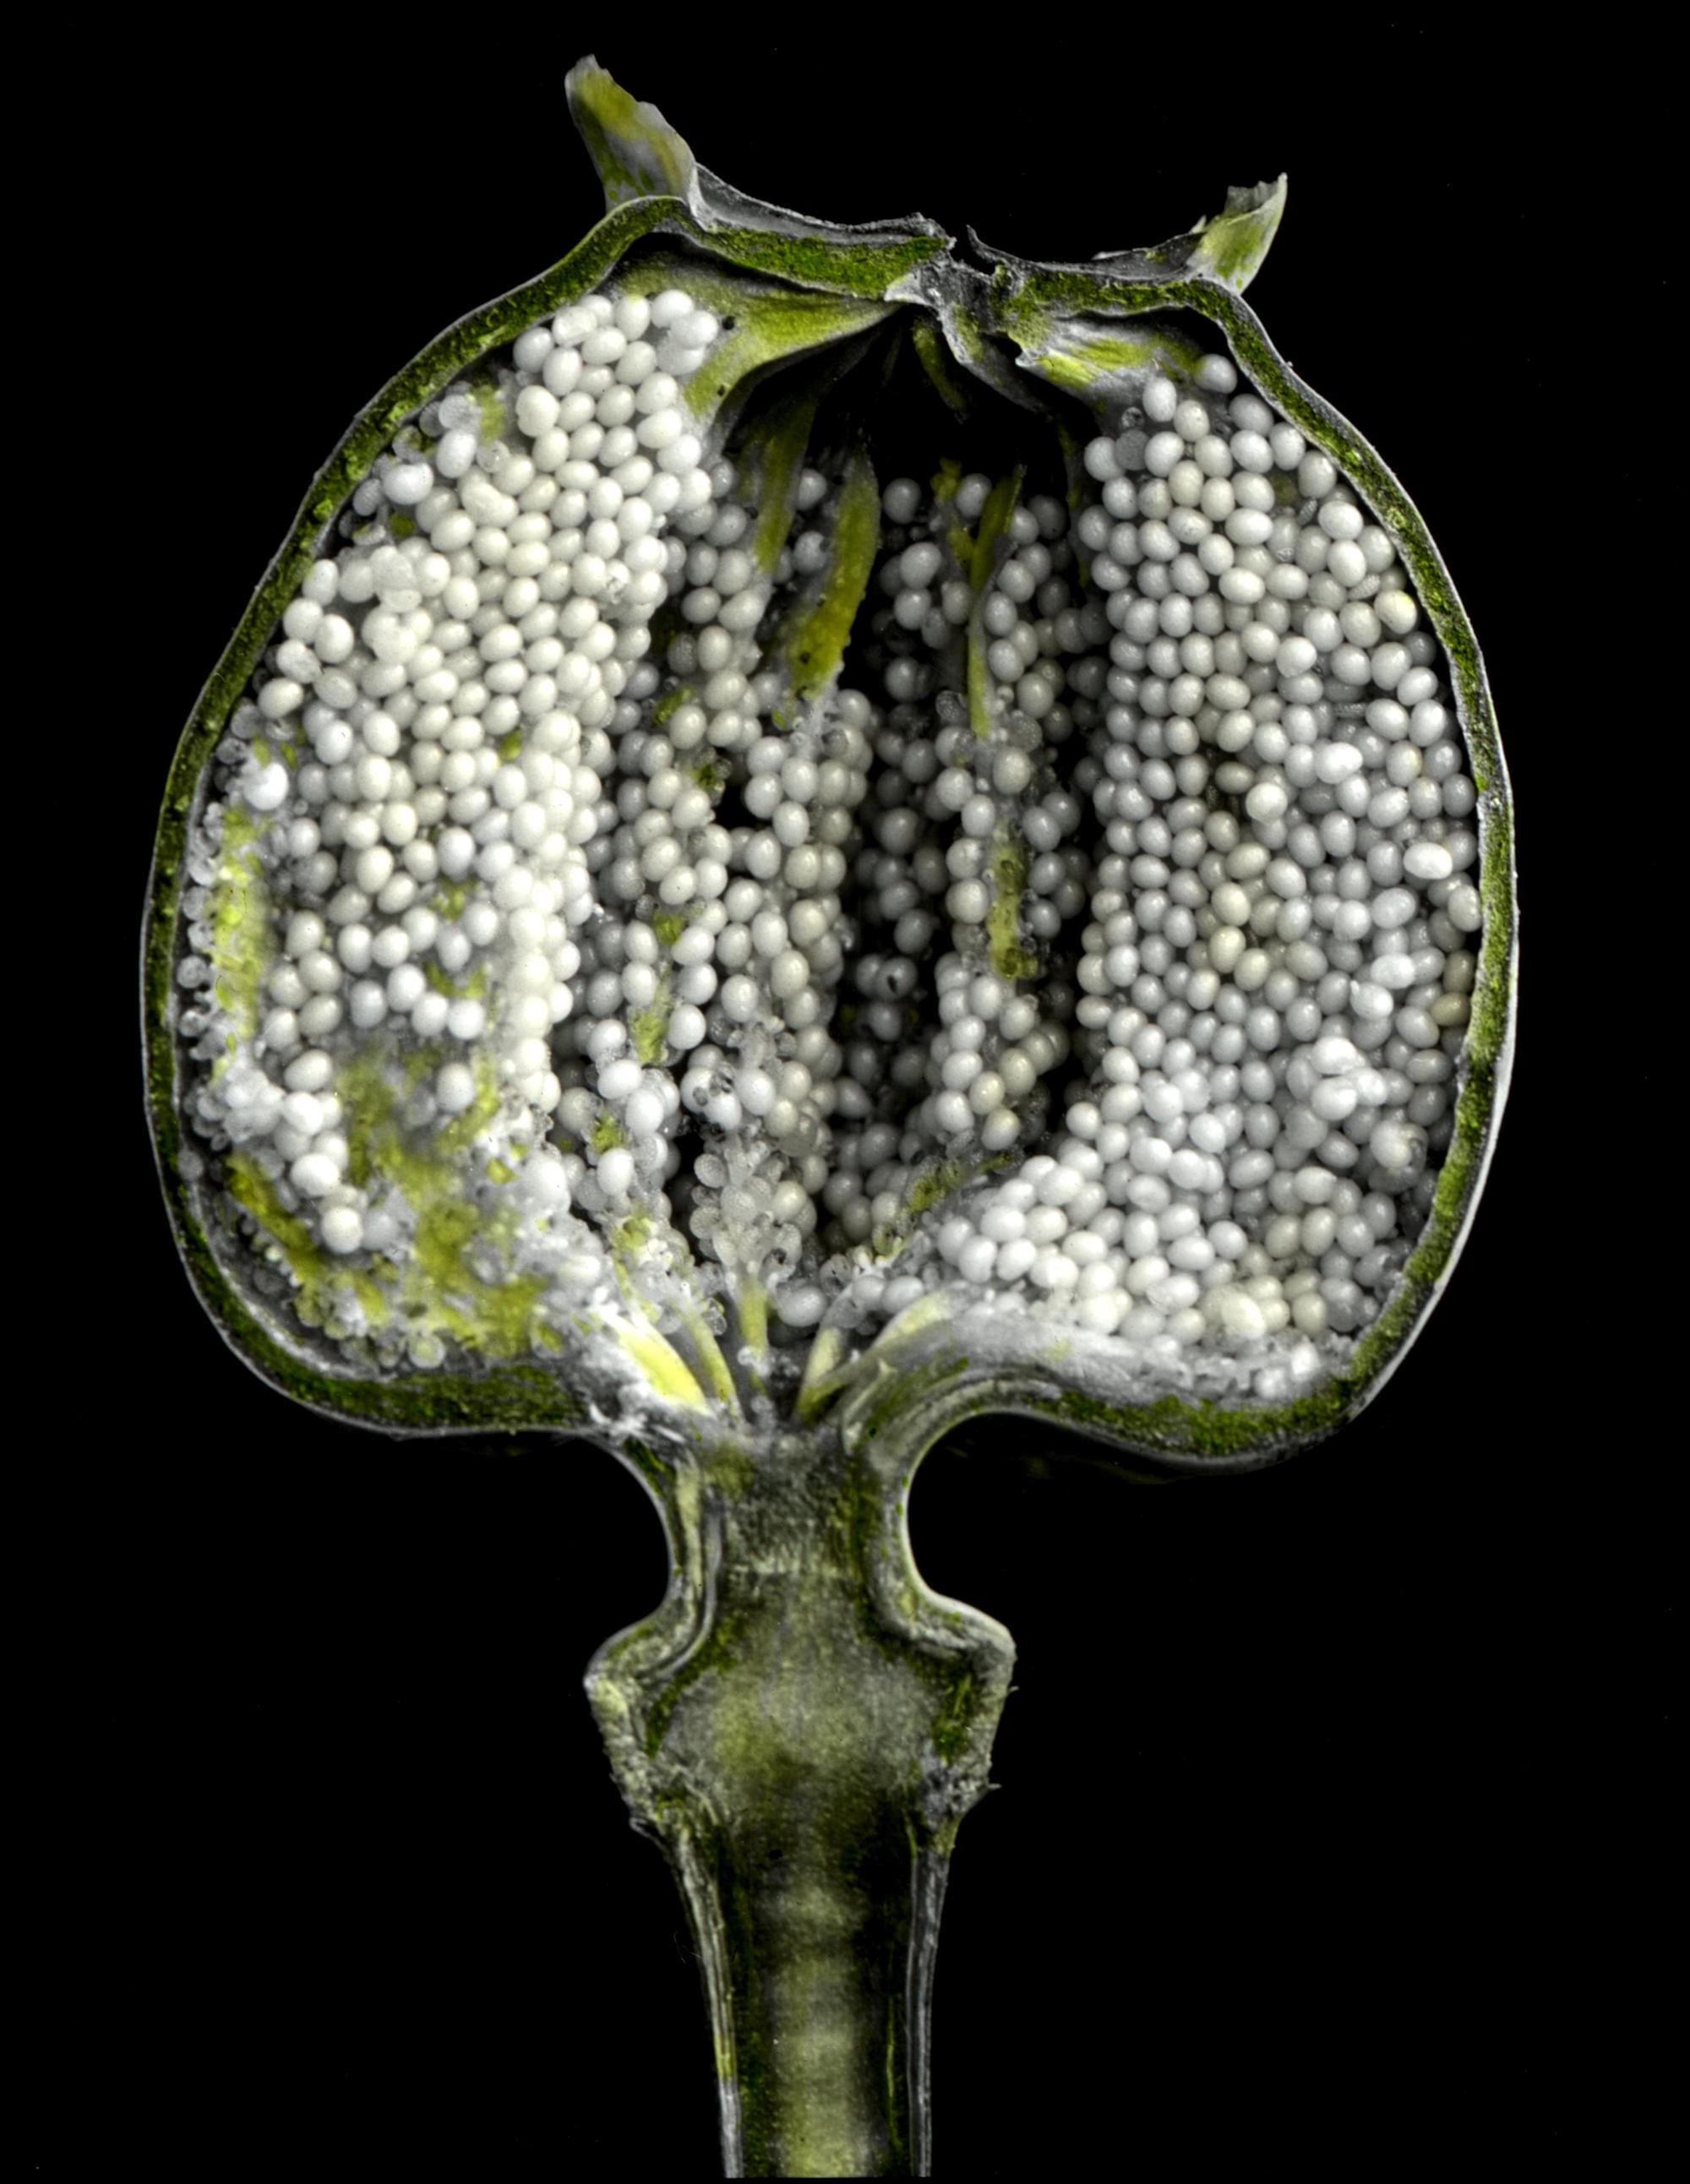 Vertical section of poppy capsule